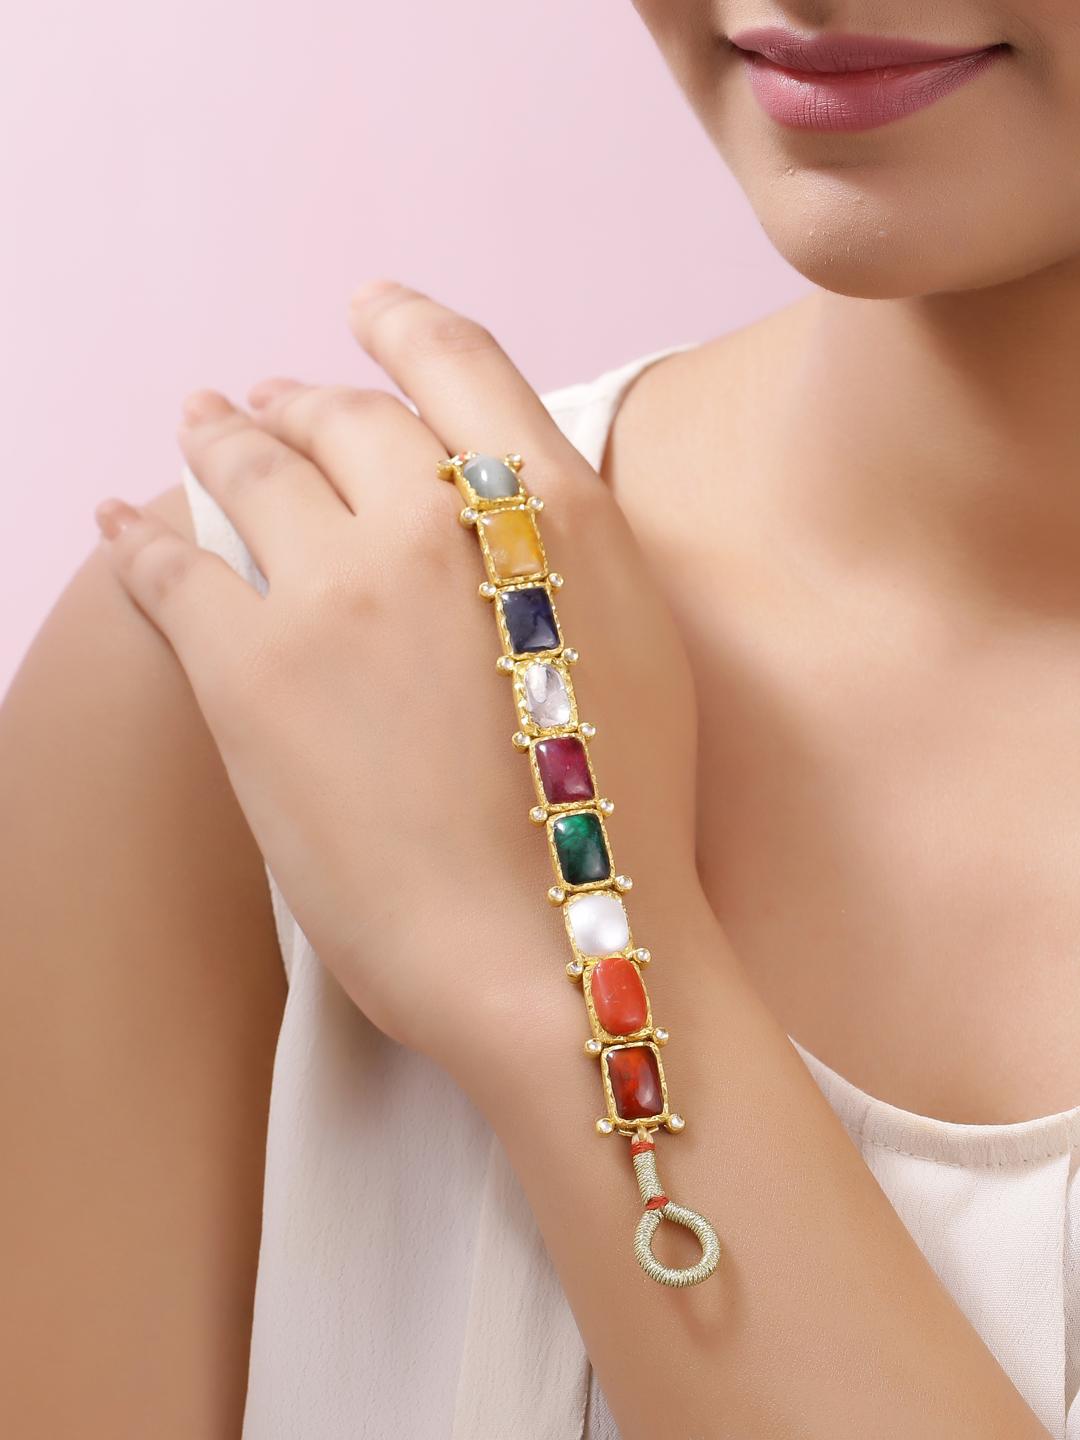 Uncut Lucky Nine Gems Bracelet Handcrafted in 18k Yellow Gold with Enamel at the Back For Sale